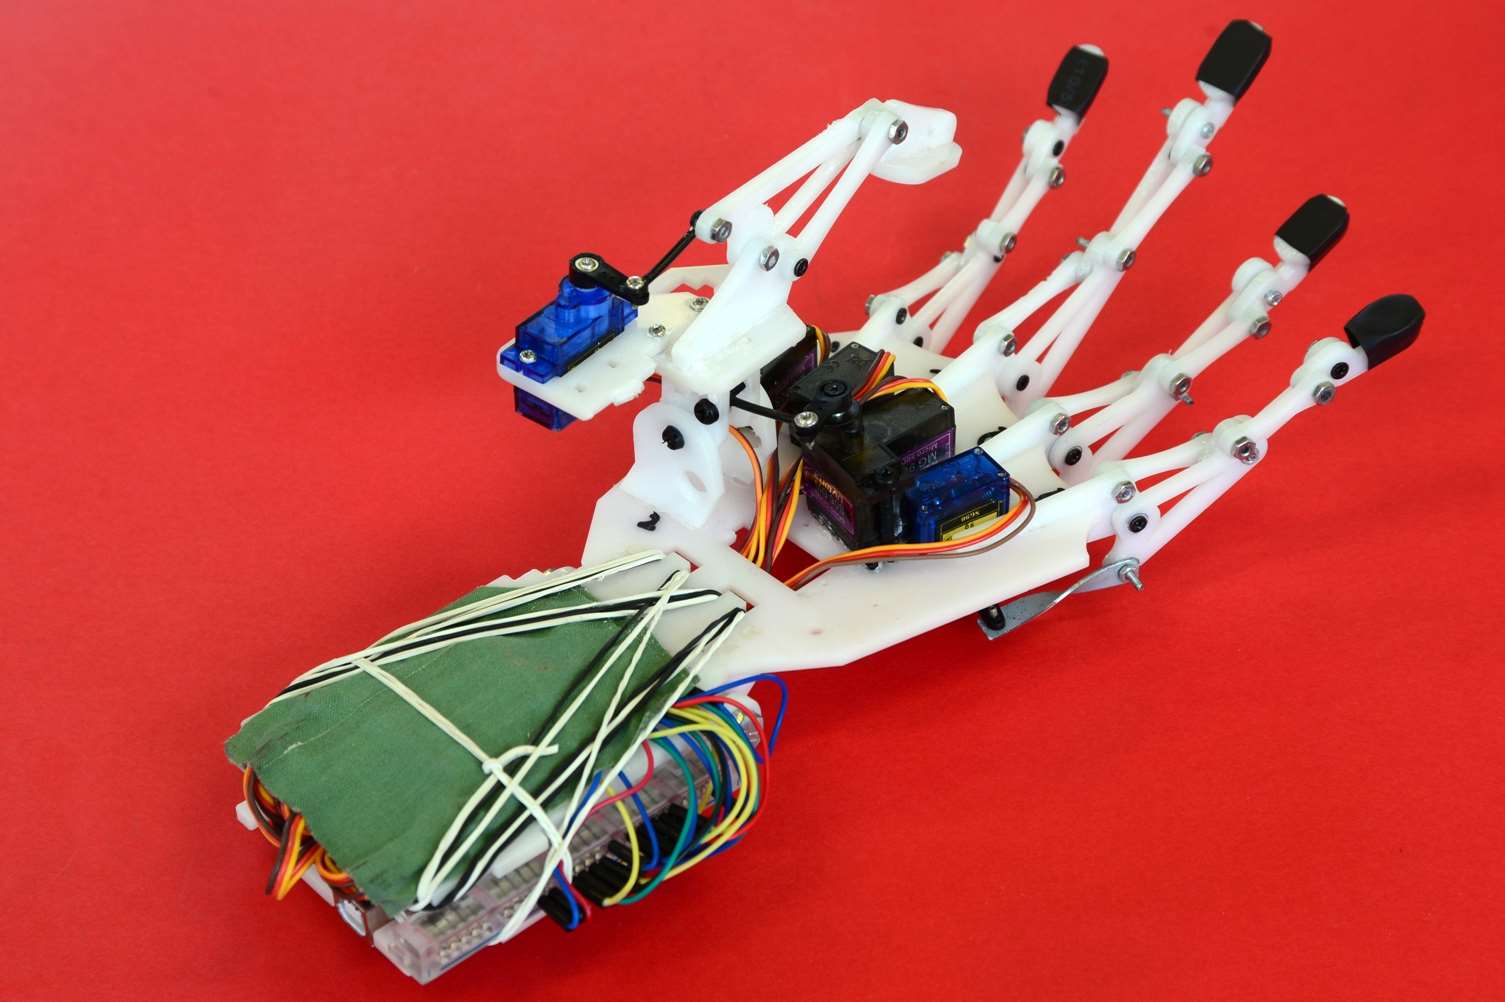 The low cost robotic arm is the latest project by Kent College's engineering team.